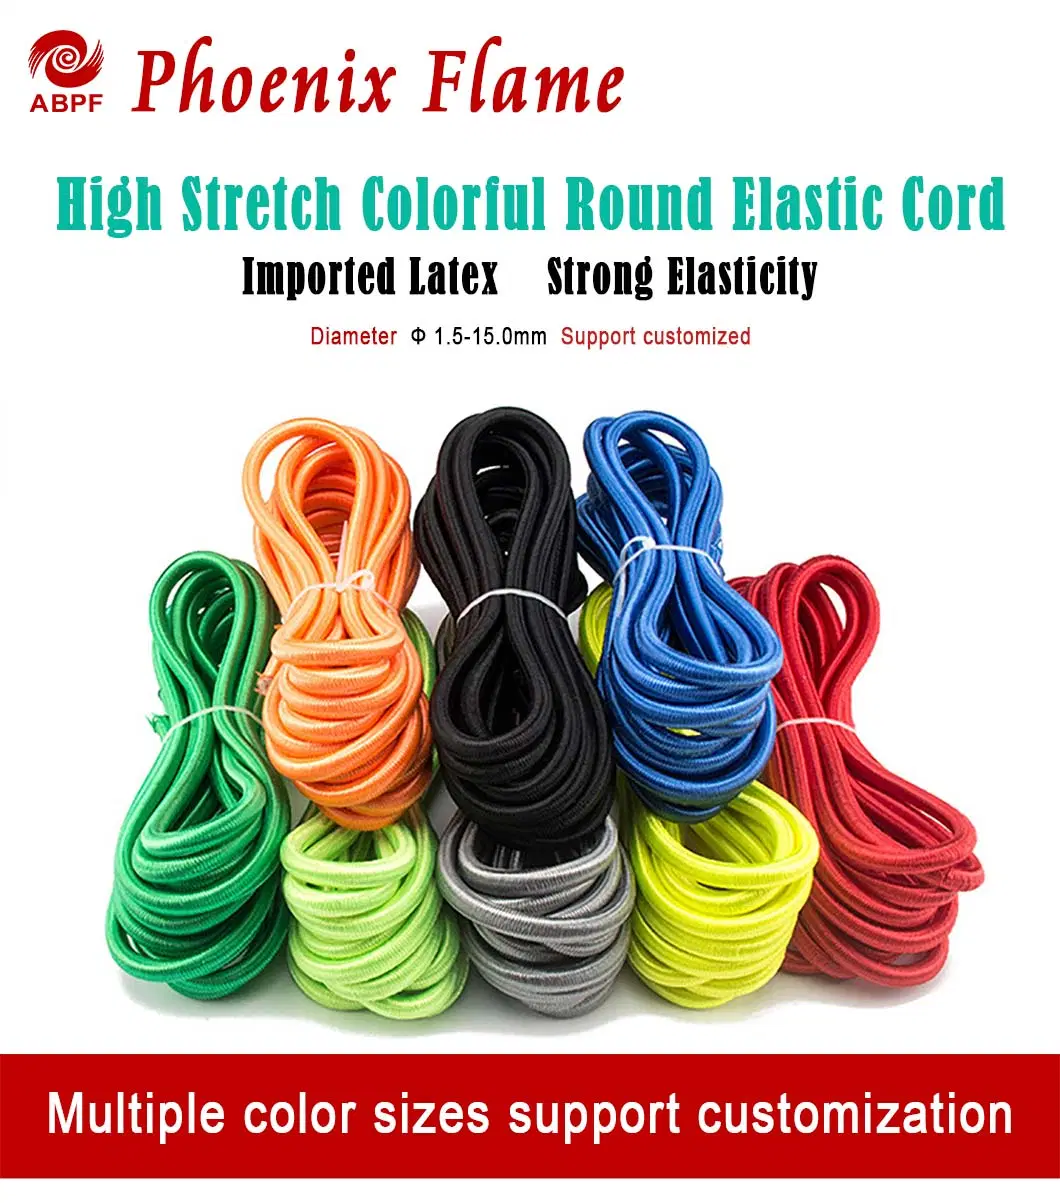 Abpf Factory Wholesale Polyester High Elasticity Drawstring Cord Round Rubber Elastic Cord